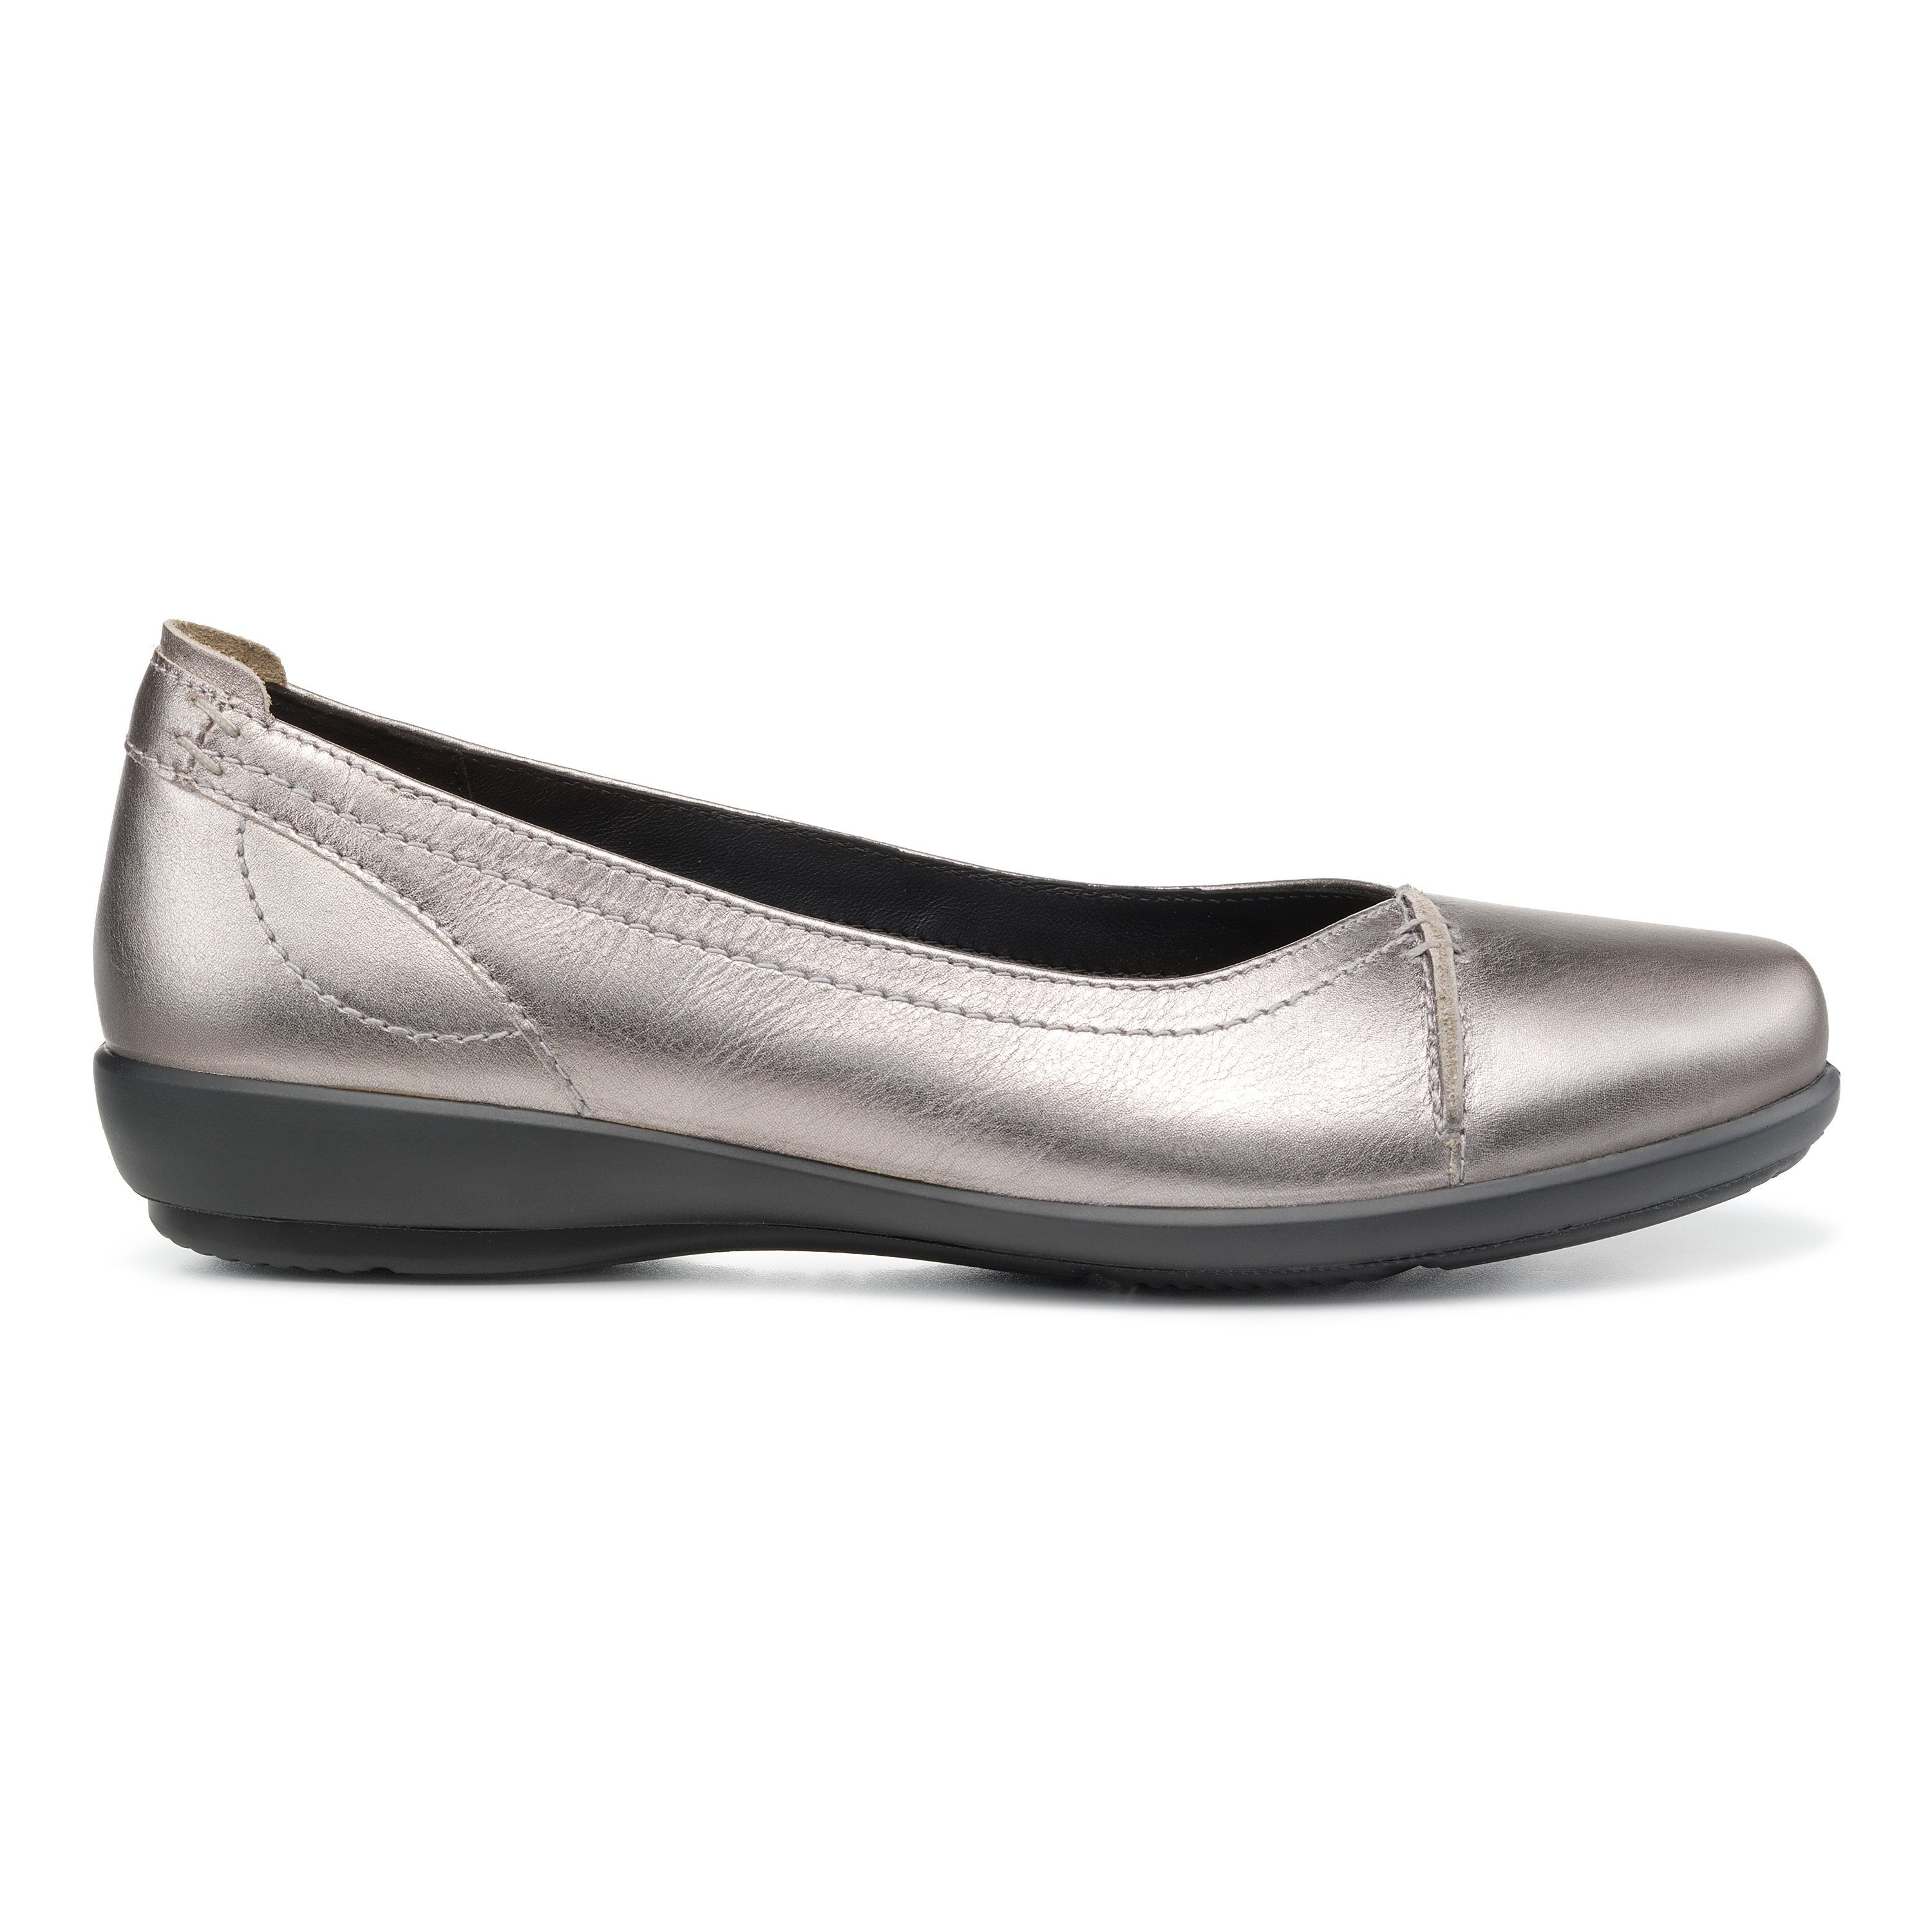 Ladies Ballerina Shoes | Womens Leather Pumps | Hotter UK